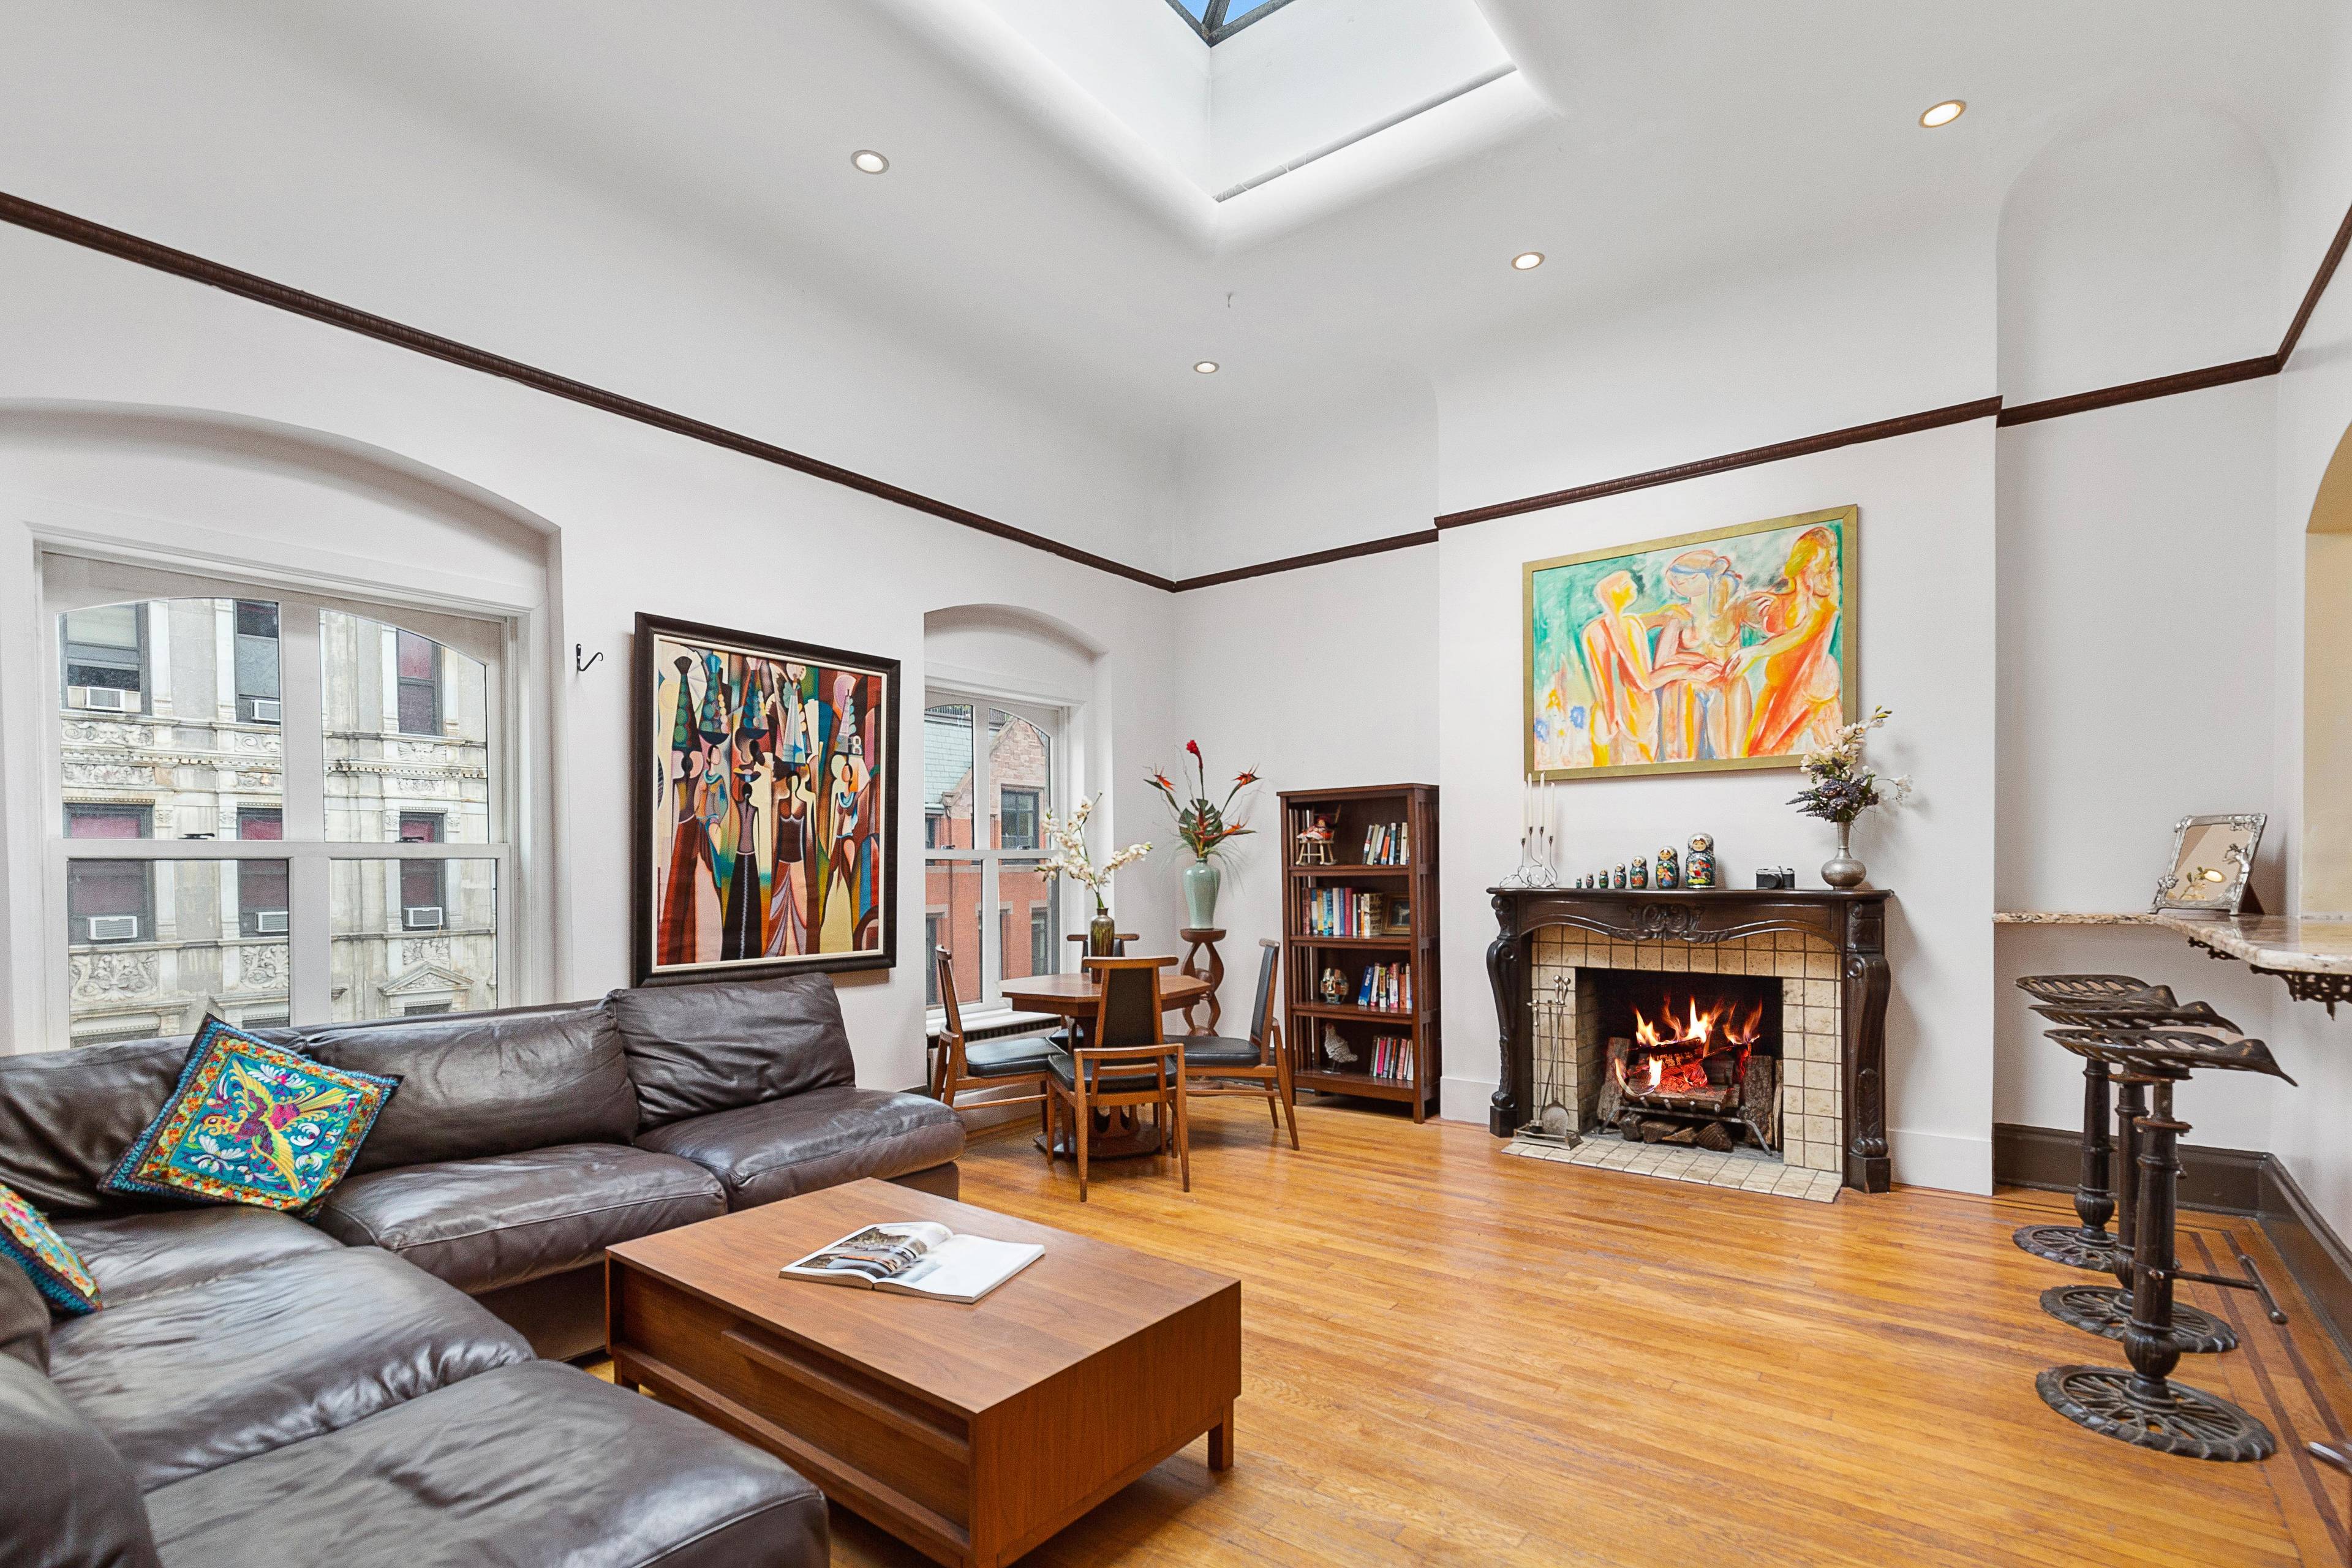 Massive Gramercy Park Penthouse 2 Bedroom with soaring ceilings & skylights